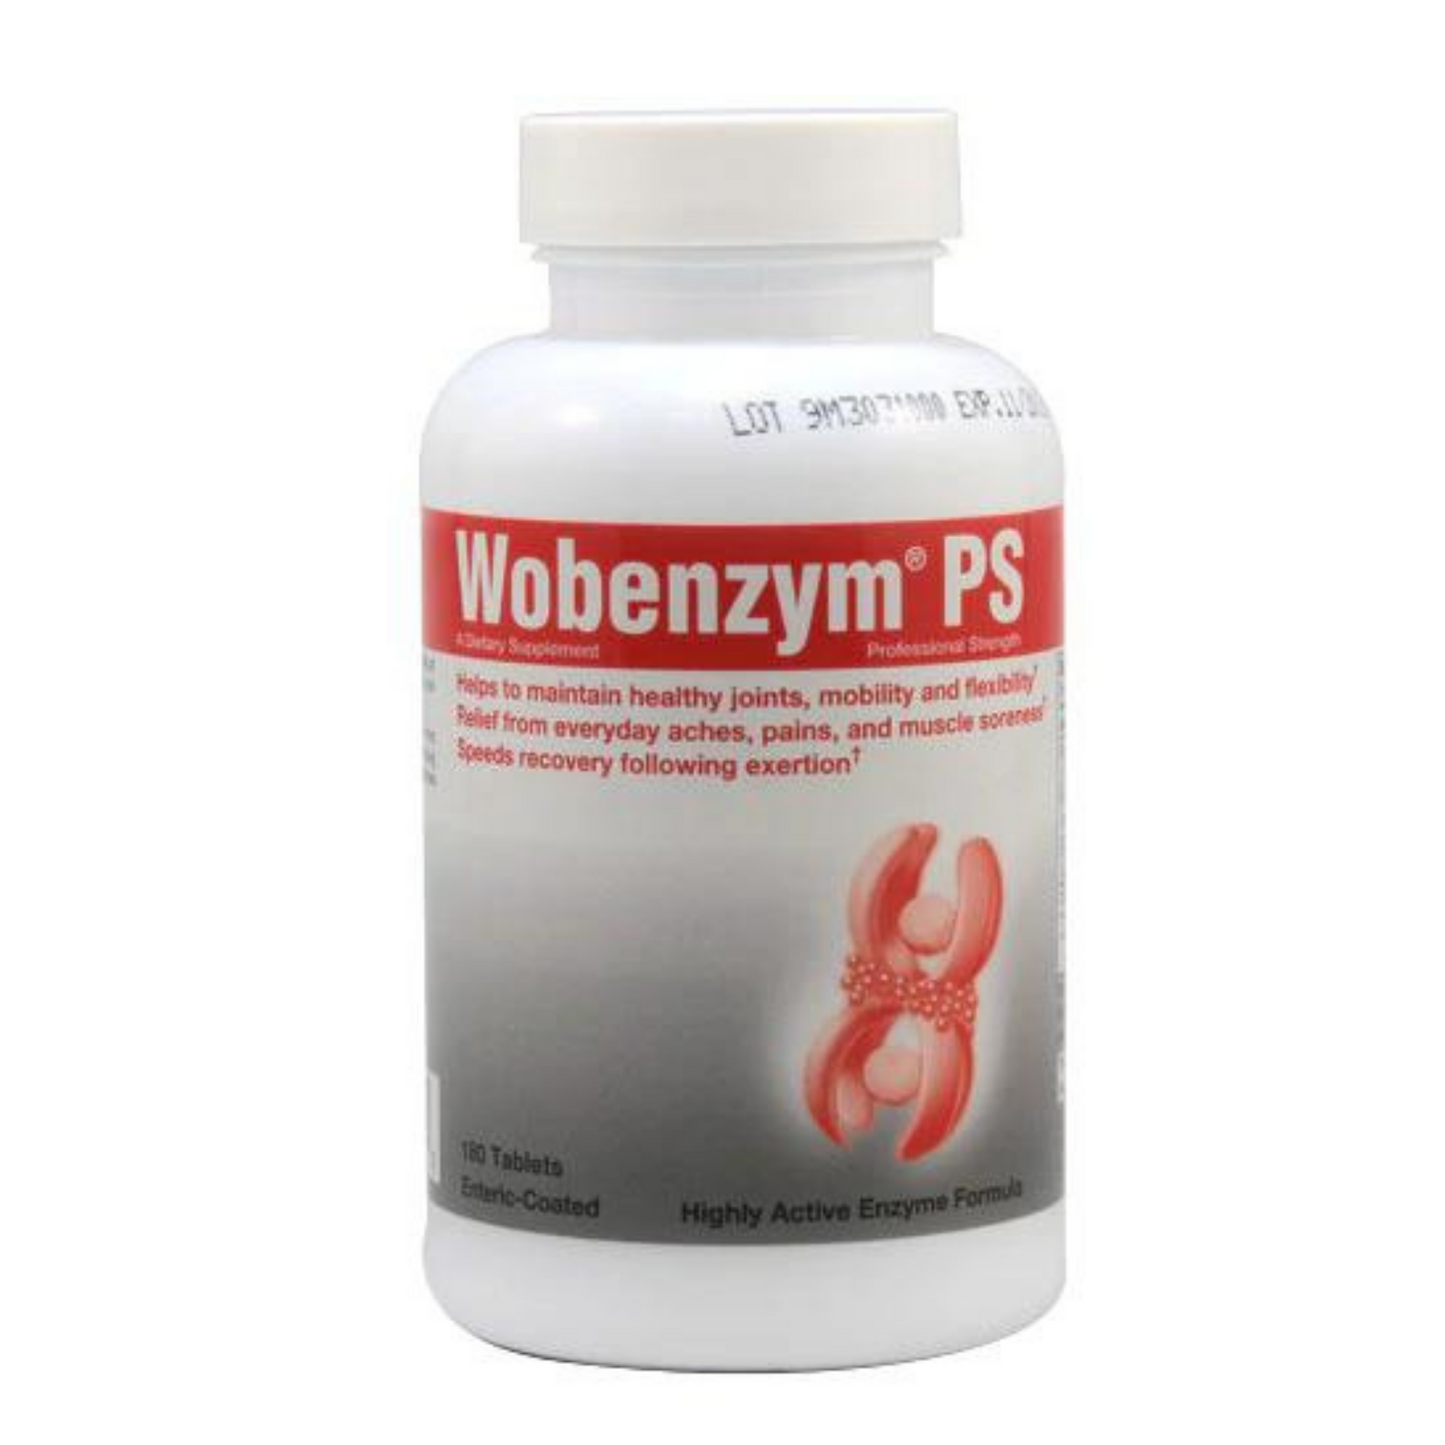 Primary image of Wobenzym PS